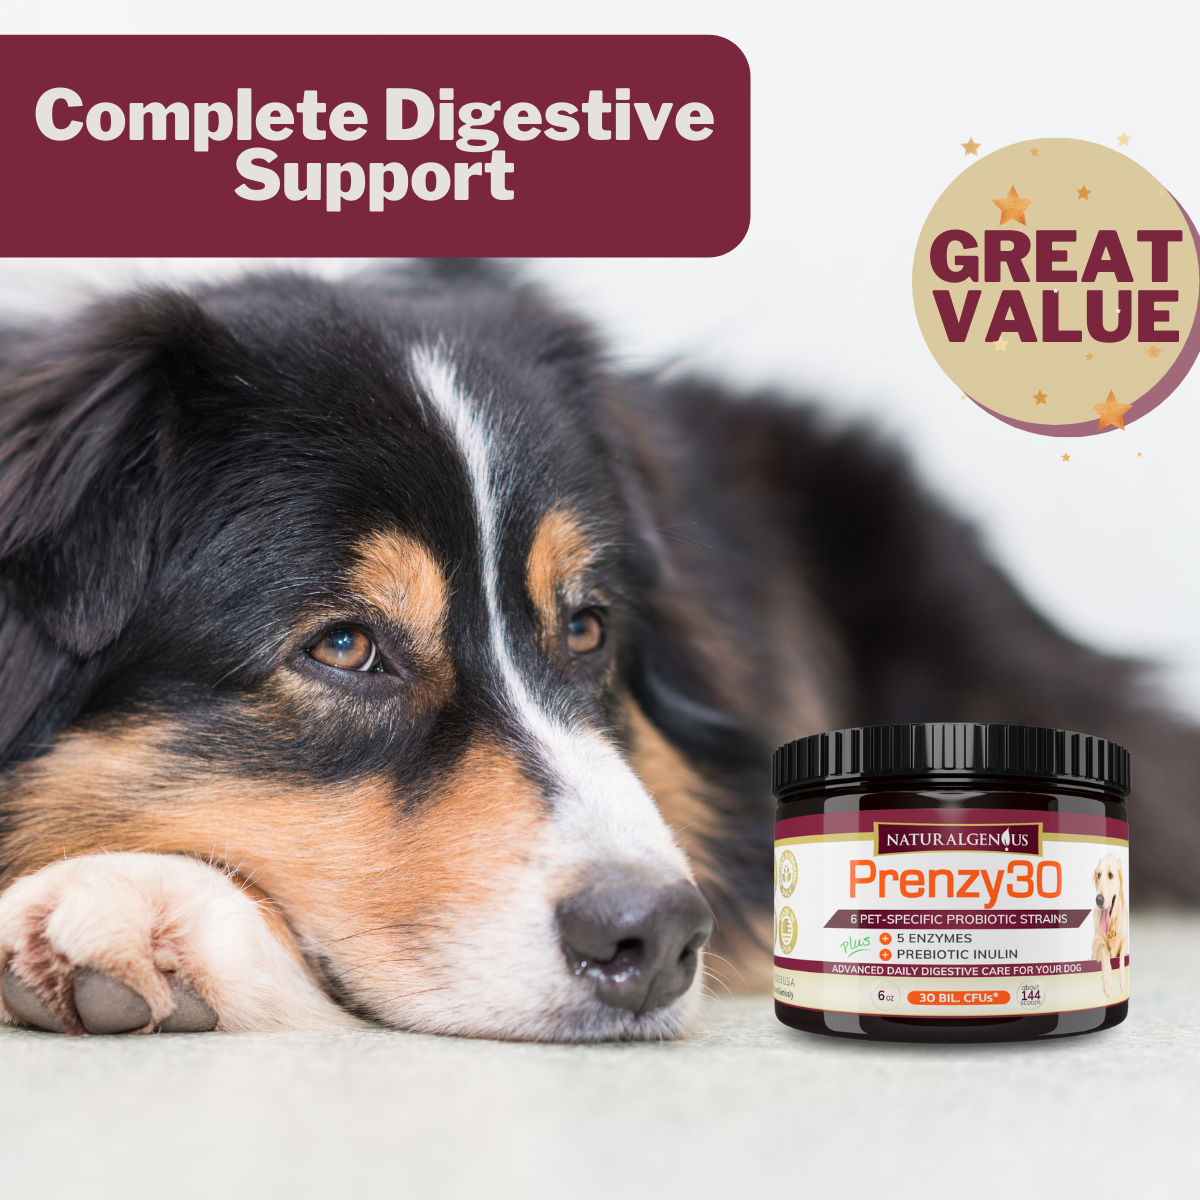 Natural Genius Dogs Probiotics & Enzymes Supplement for Diarrhea, Constipation and Digestive Health - image 3 of 8